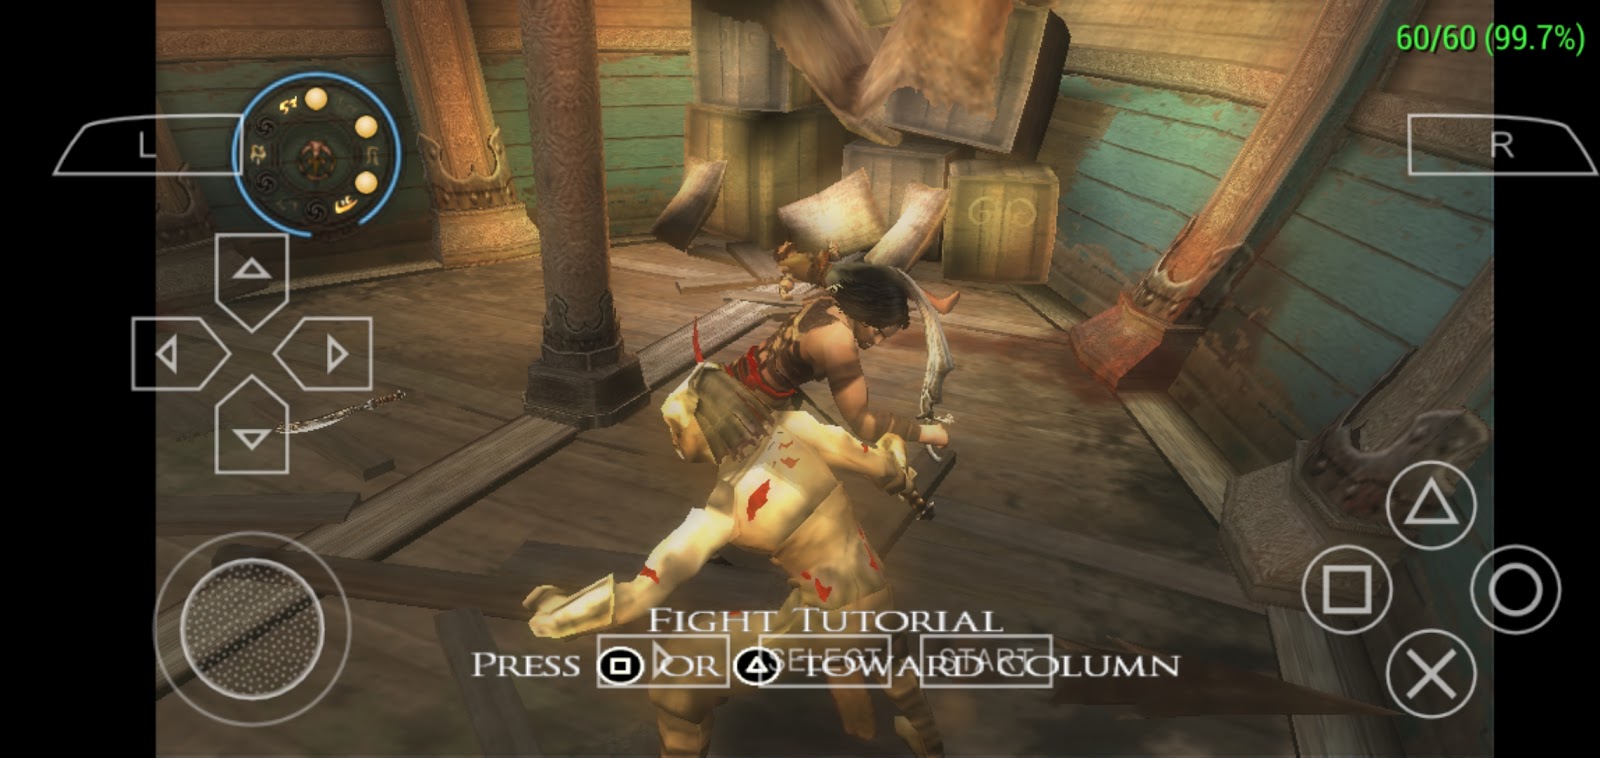 Prince of Persia Revelations PPSSPP Gameplay Full HD / 60FPS 